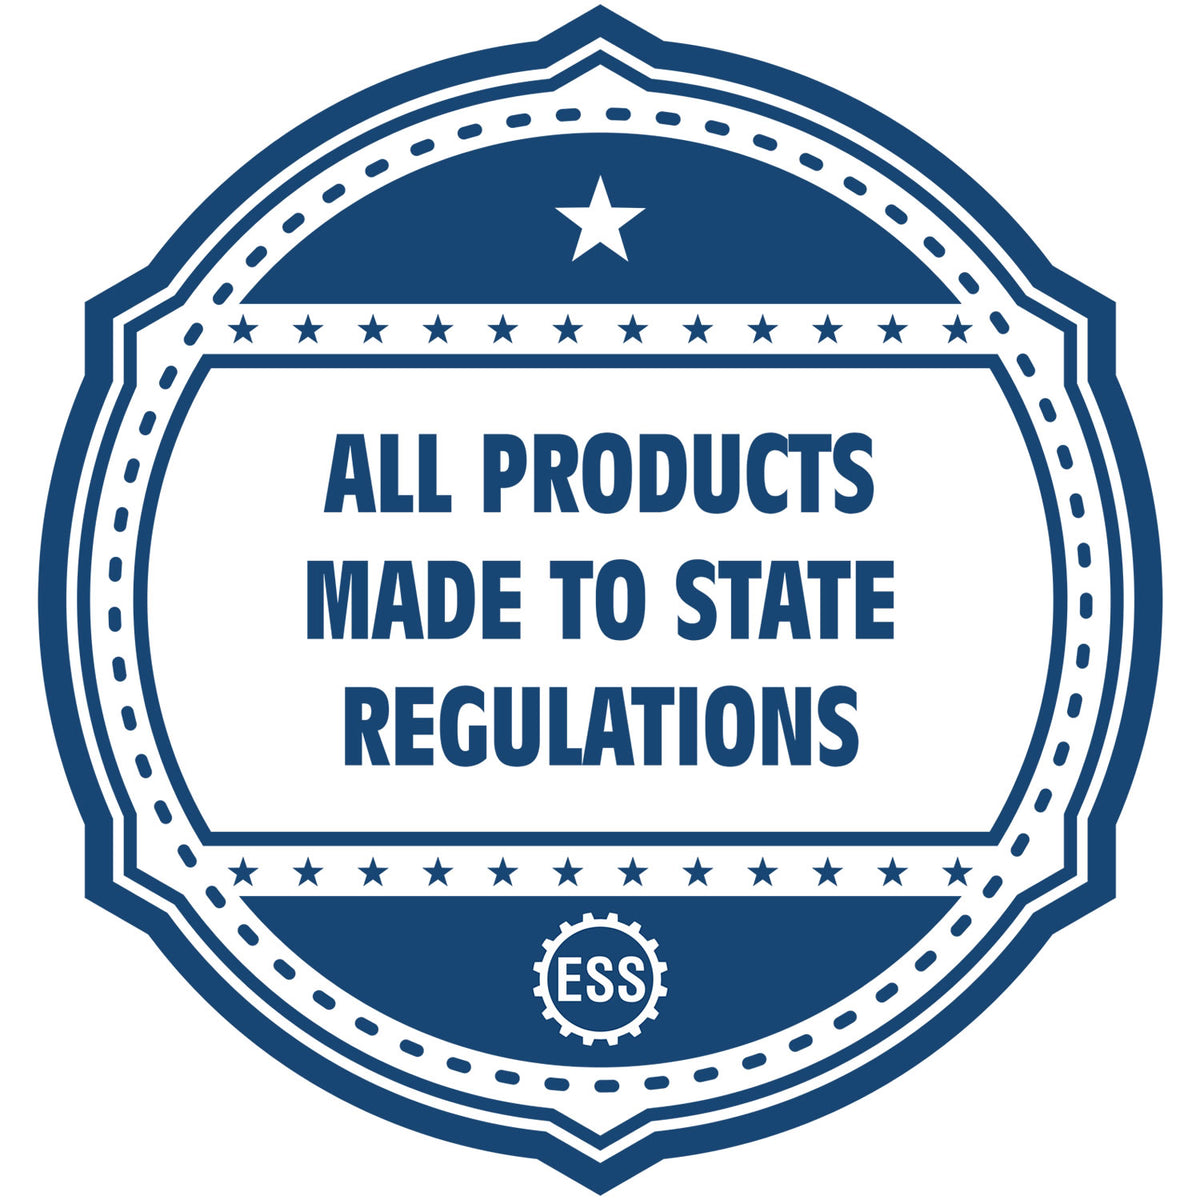 An icon or badge element for the Super Slim Maine Notary Public Stamp showing that this product is made in compliance with state regulations.